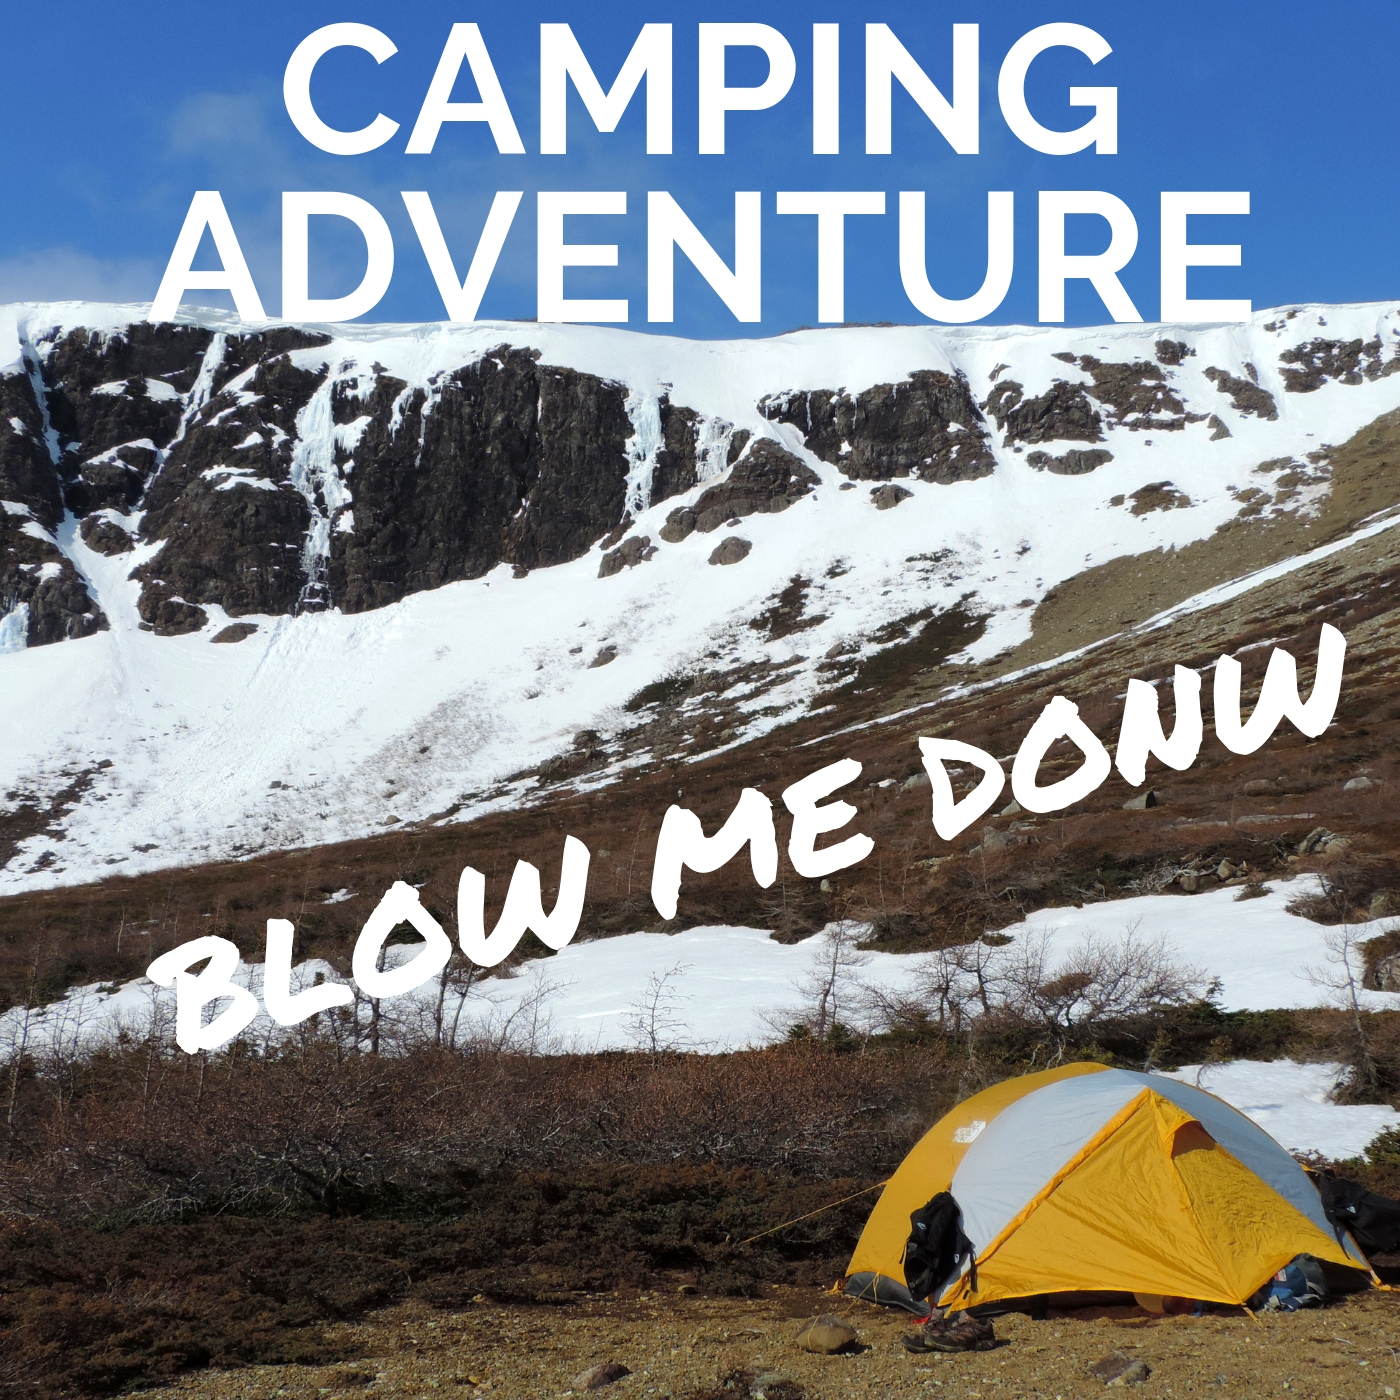 Blow Me Down Camping Adventure, Blow Me Down mountains, winter camping, Newfoundland, Wildly Intrepid